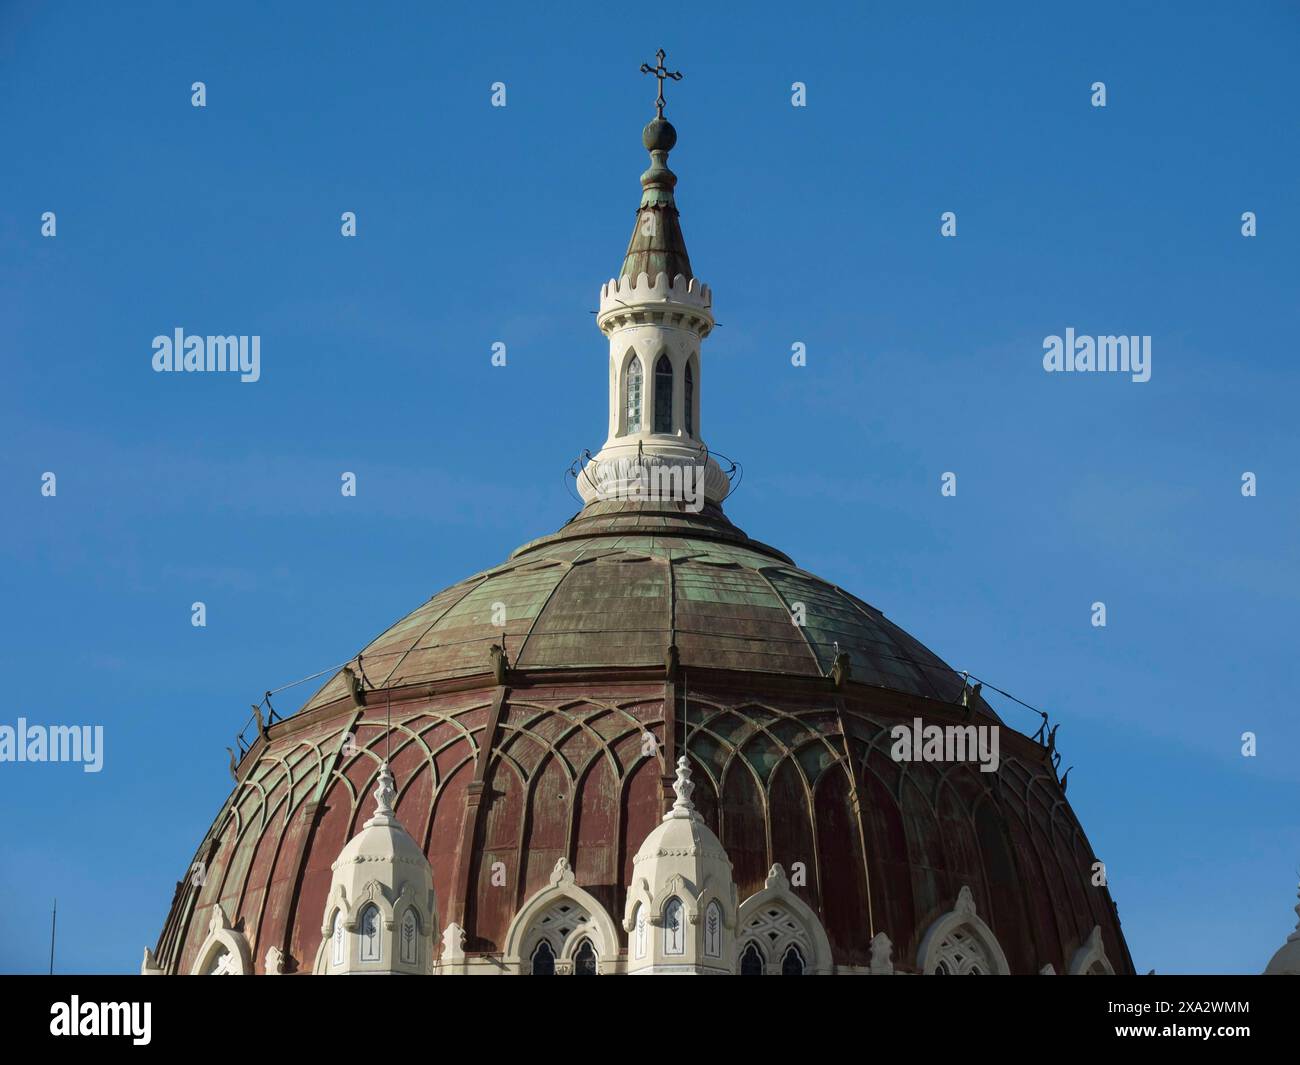 Church dome in detail with clear structure and cross on top in front of blue sky, Madrid, Spain Stock Photo